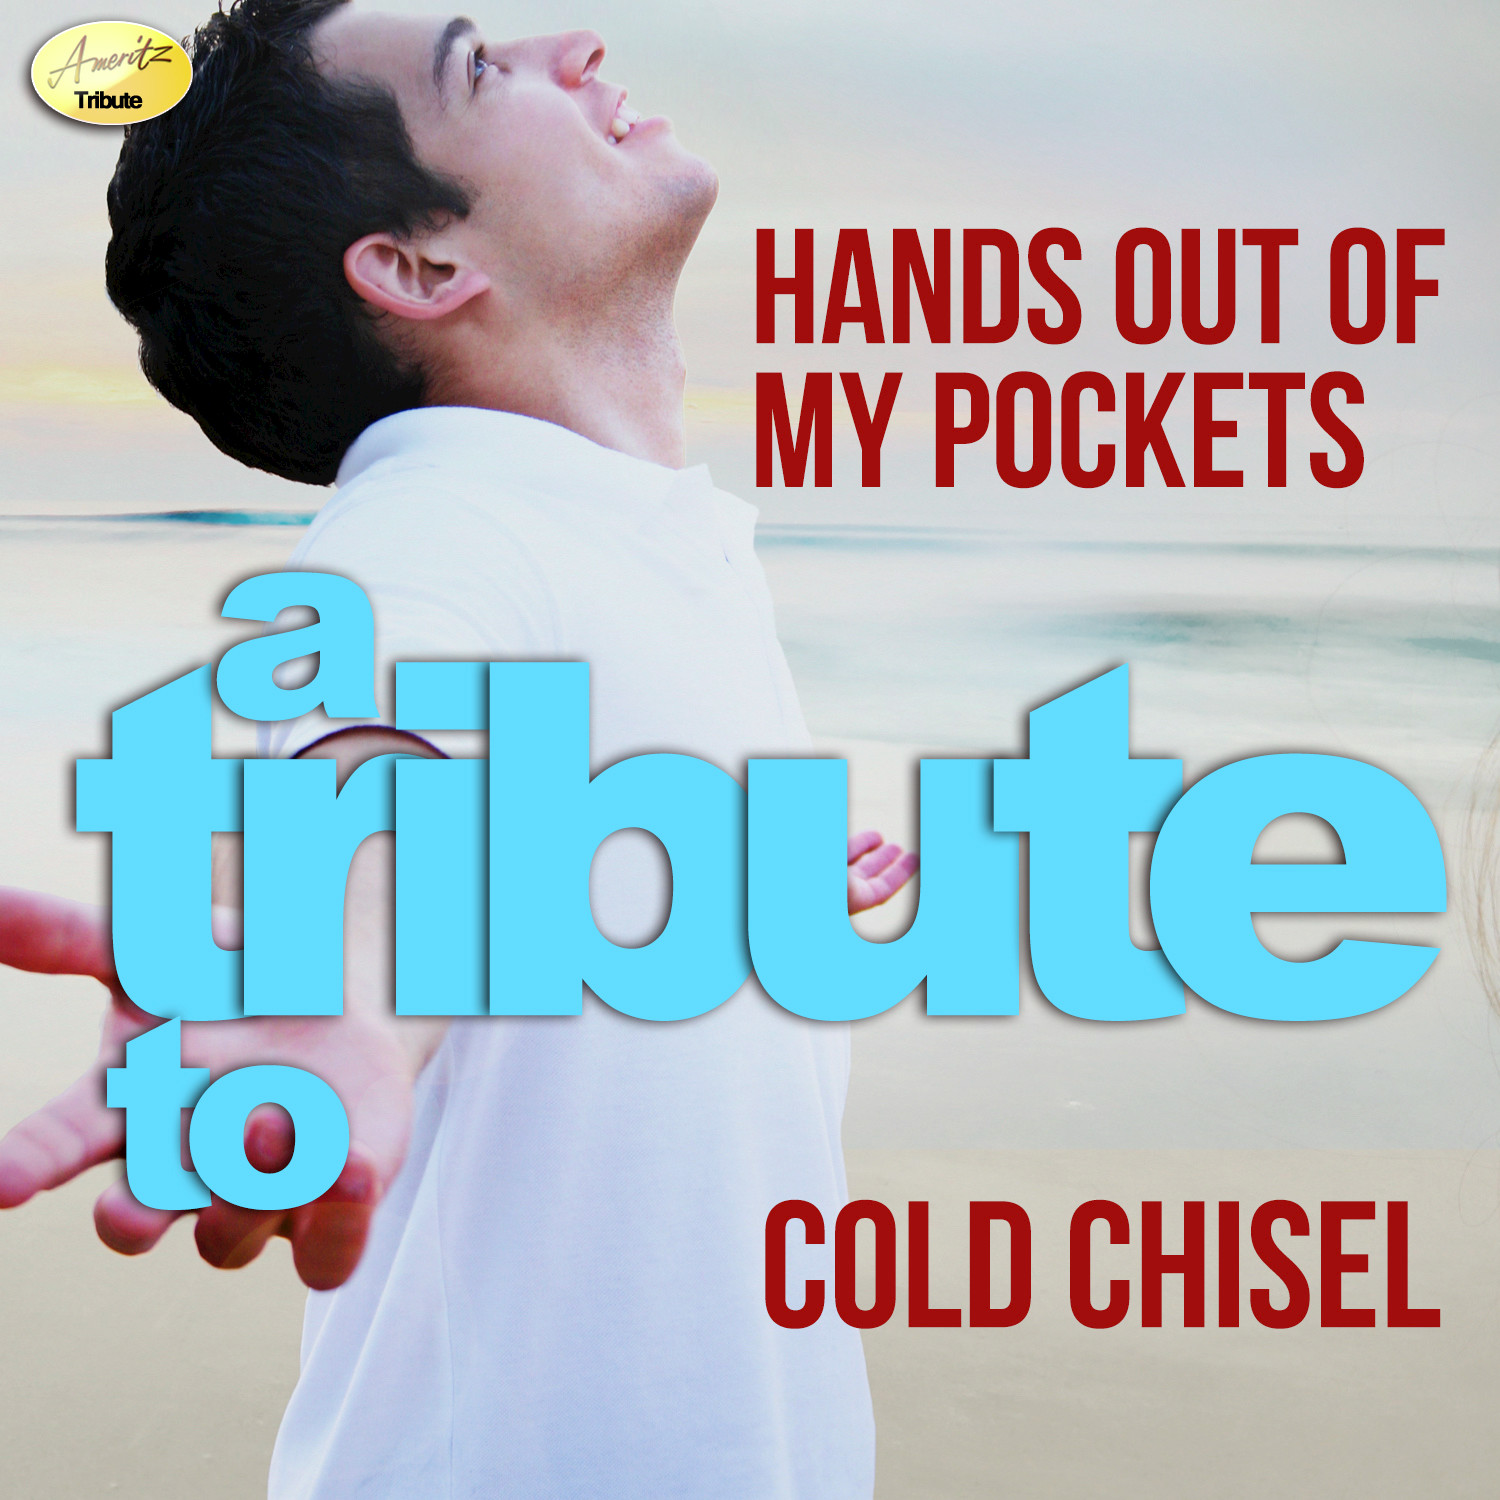 Hands out of My Pocket - A Tribute to Cold Chisel